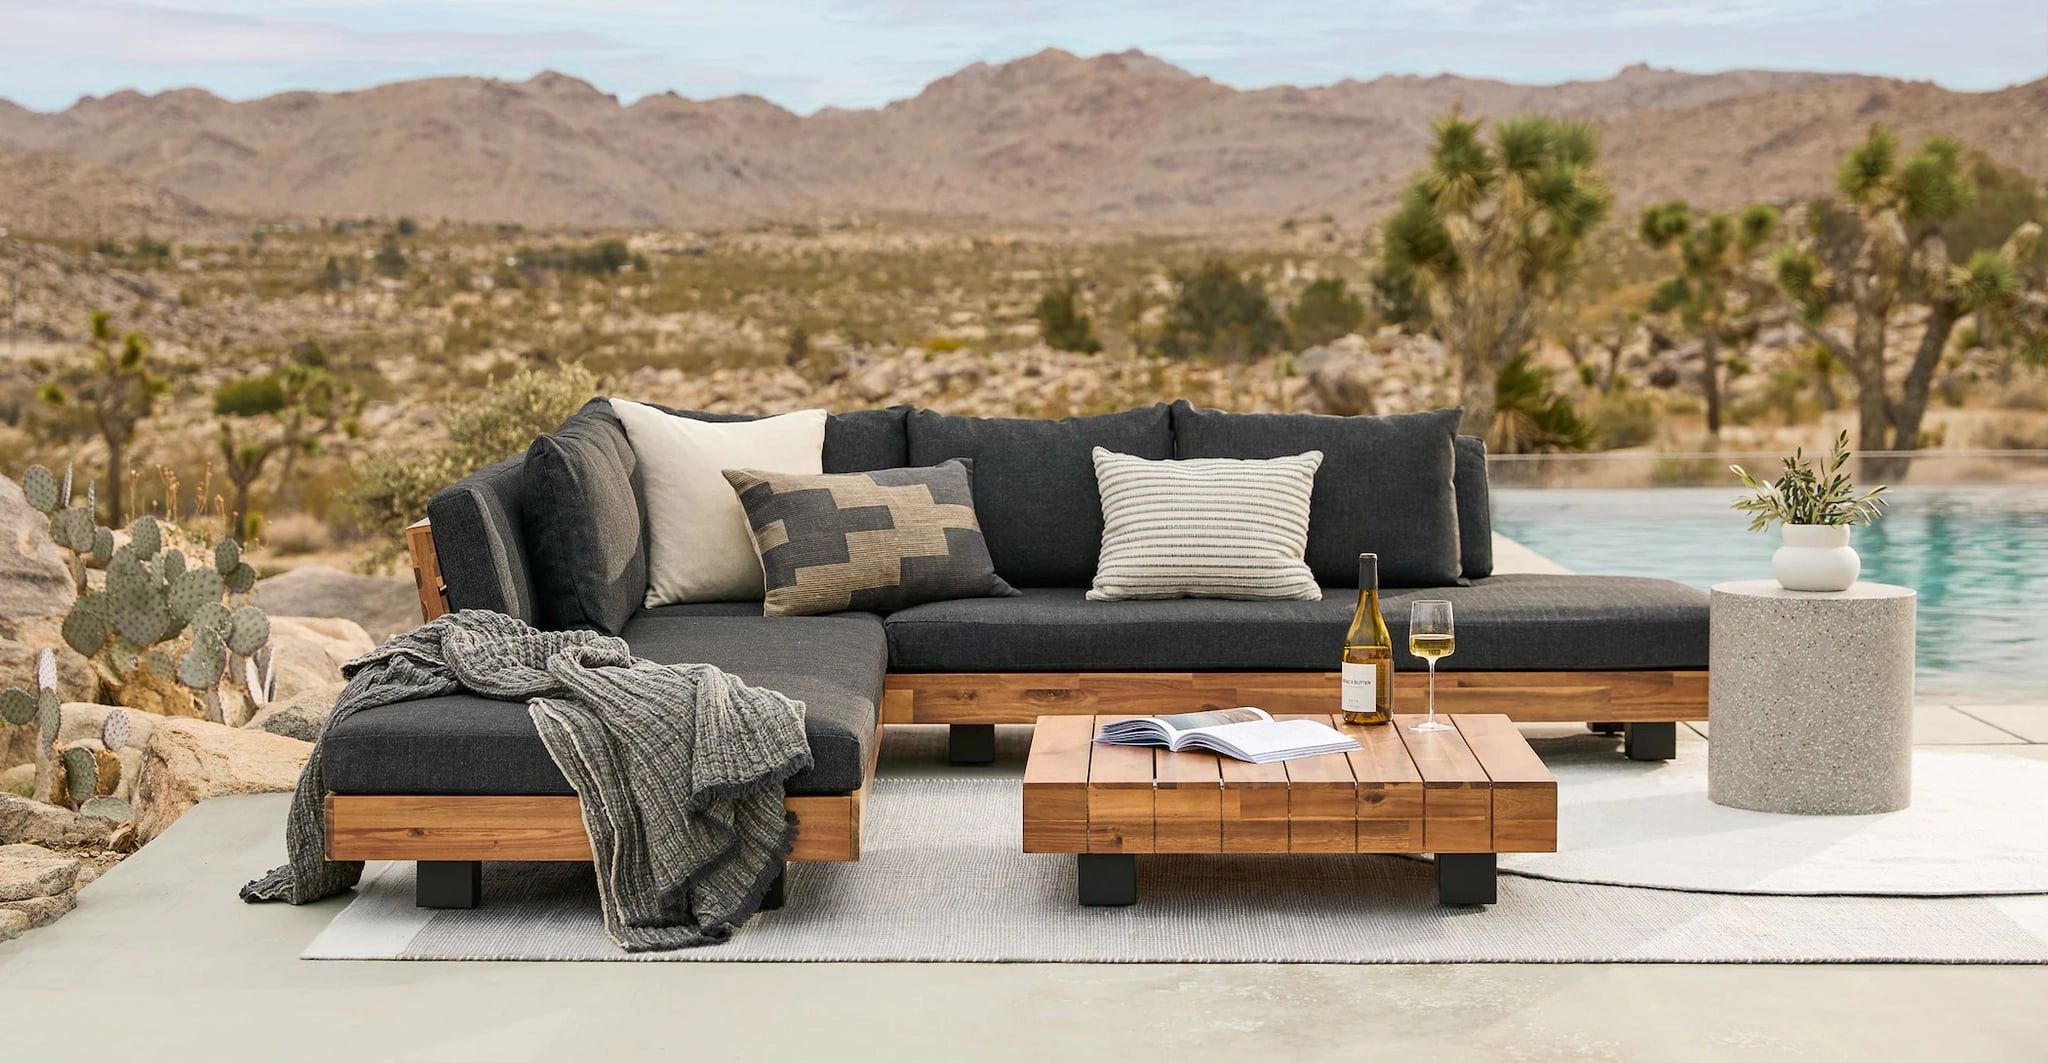 The Most Comfortable Outdoor Furniture To Shop In 2023 | Popsugar Home Inside Outdoor Couch Cushions, Throw Pillows And Slat Coffee Table (View 13 of 15)